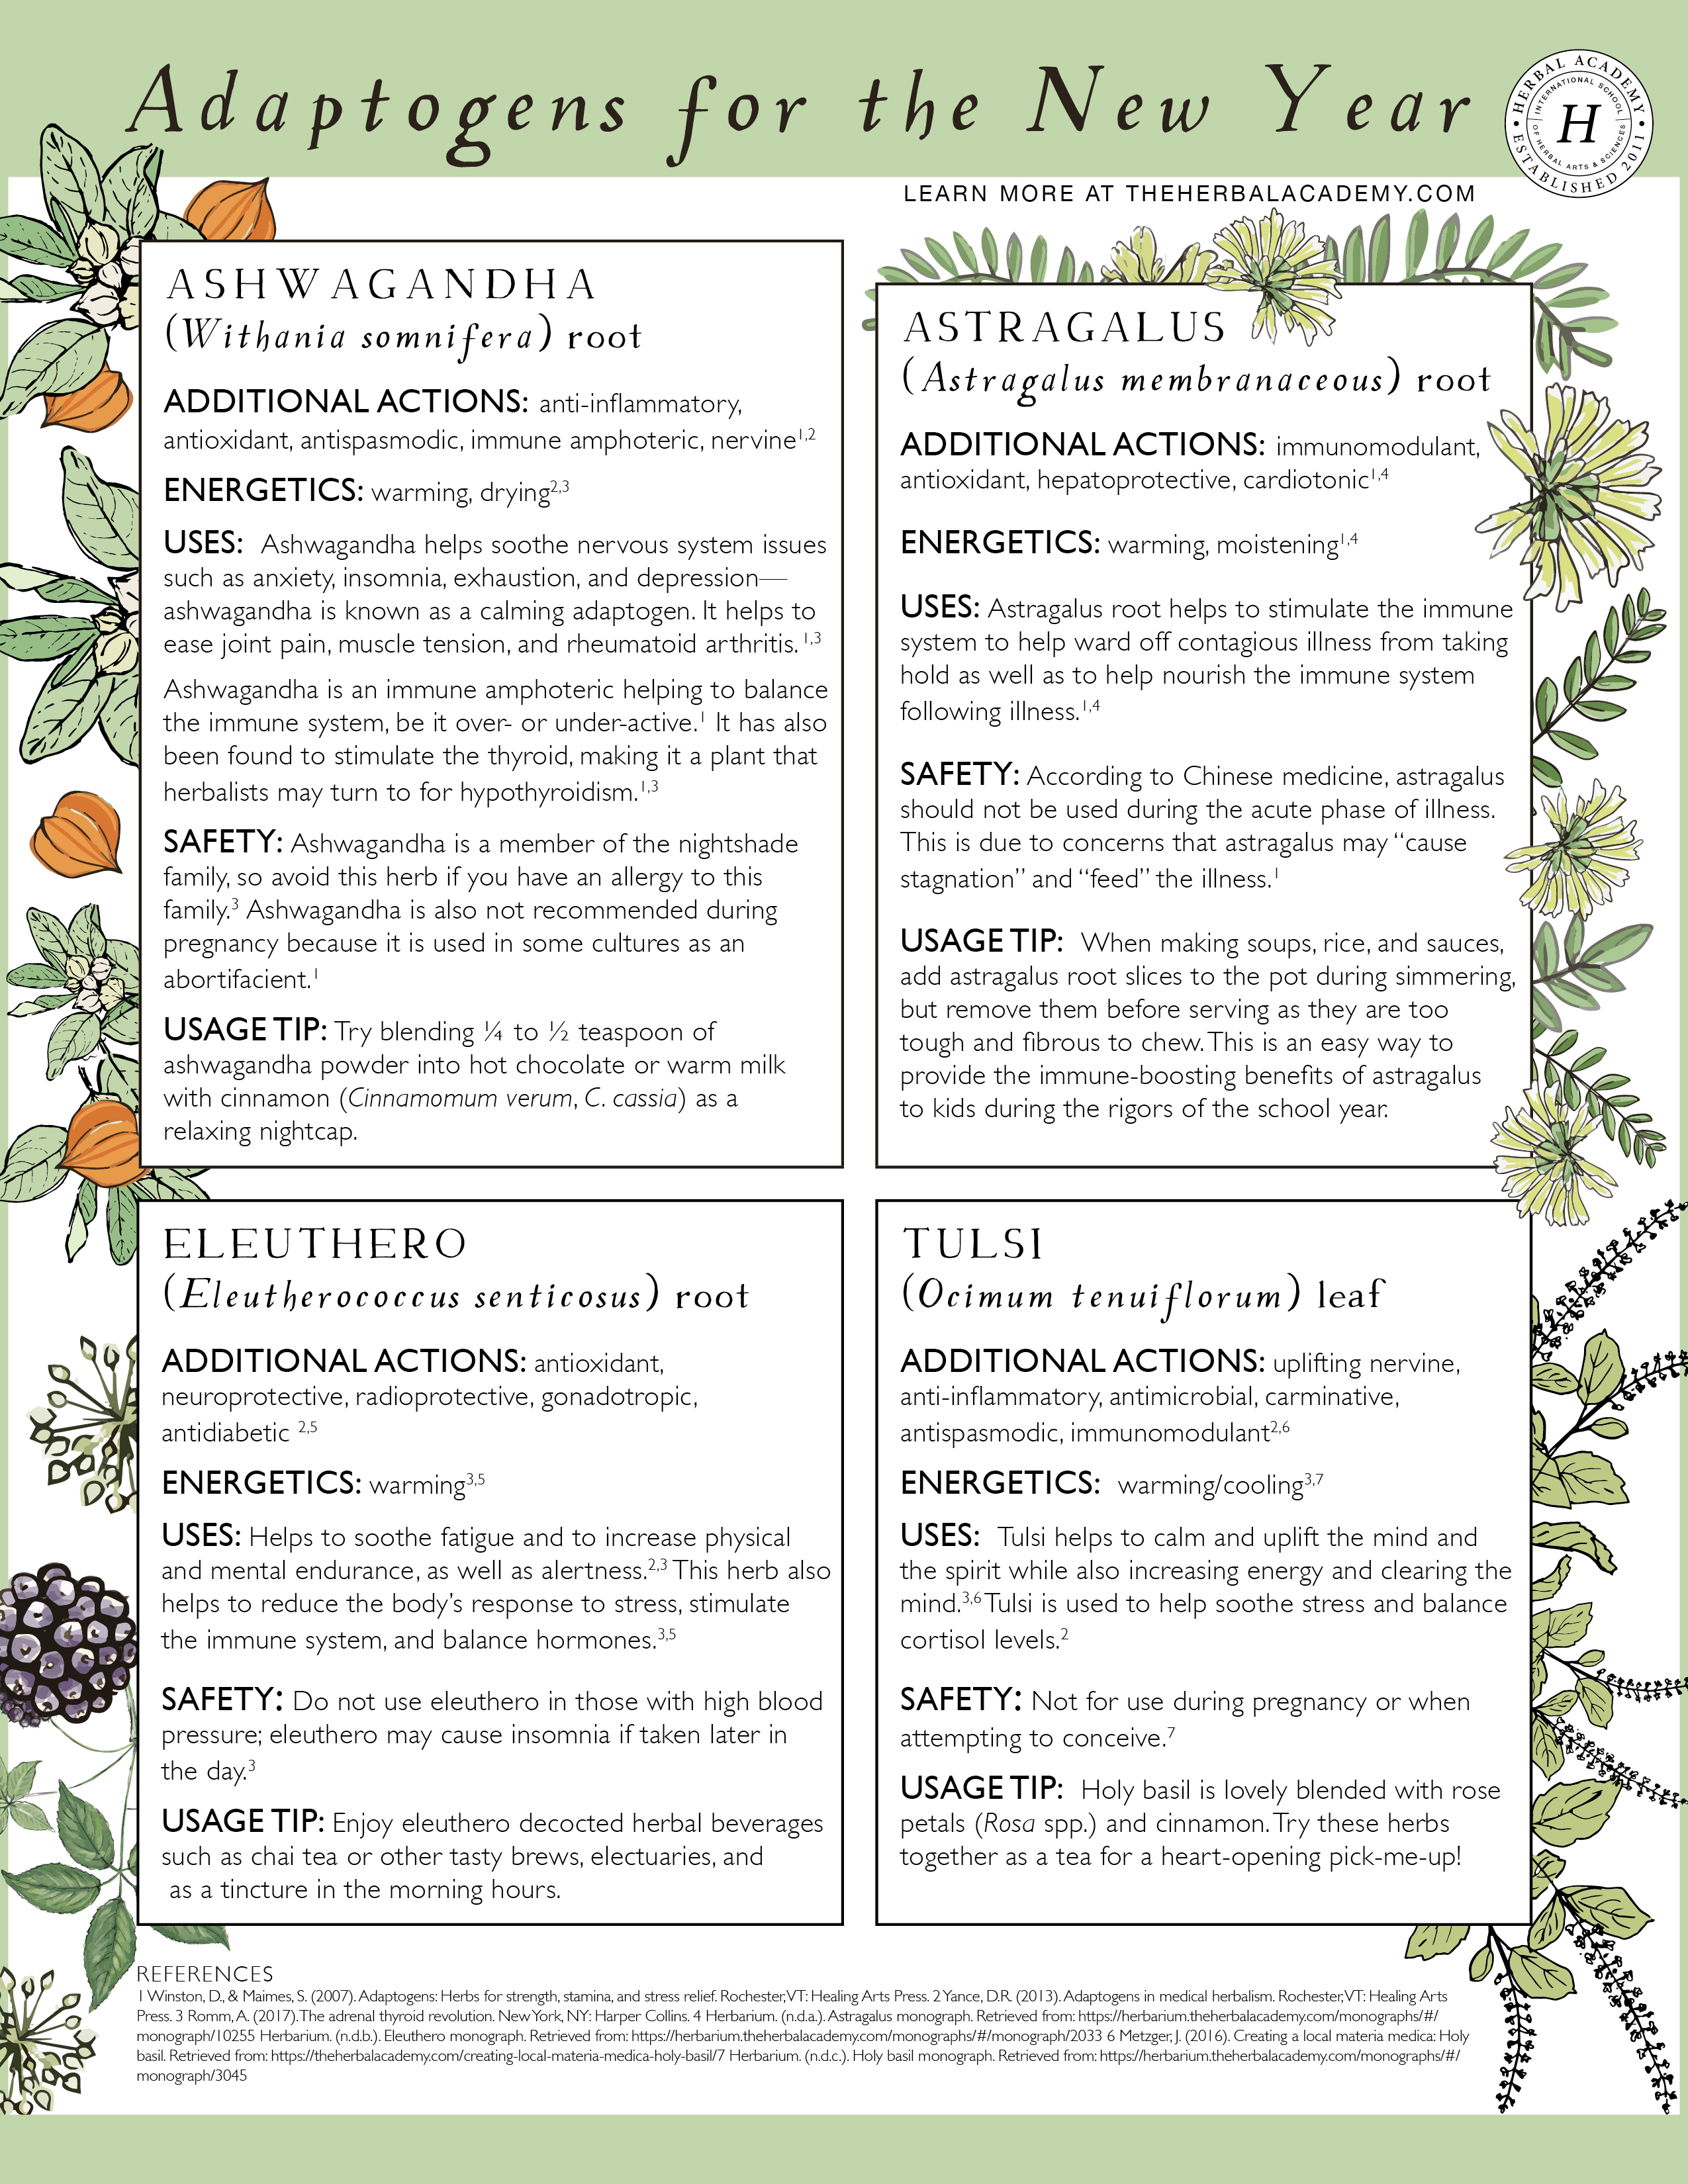 How to Ring in the New Year with Herbs | Herbal Academy | Learn how to embrace wellness during the new year with herbs as part of a holistic paradigm.